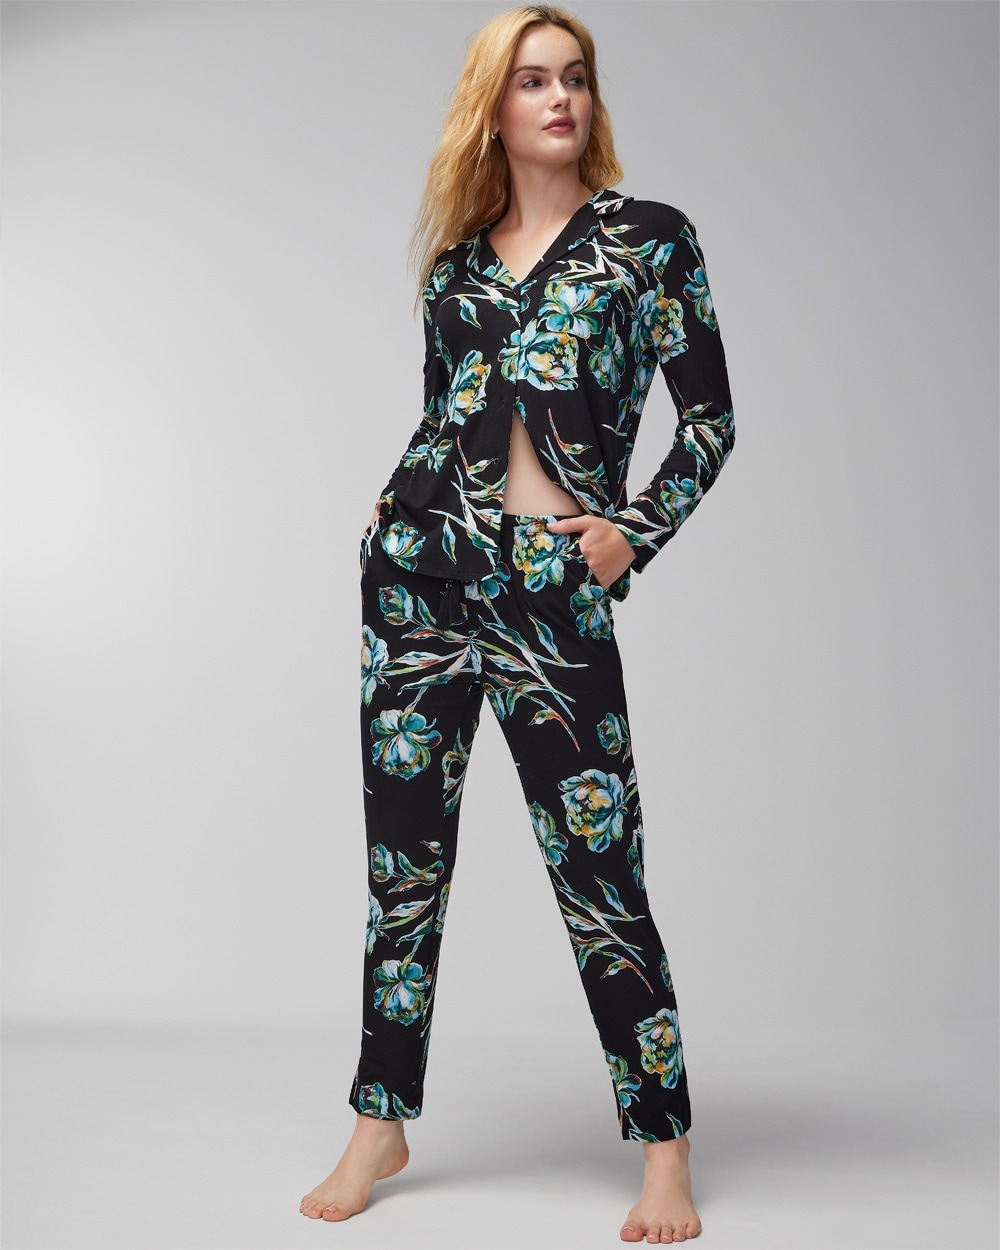 Cool Nights Tassel-Tie Ankle Pajama Pants video preview image, click to start video